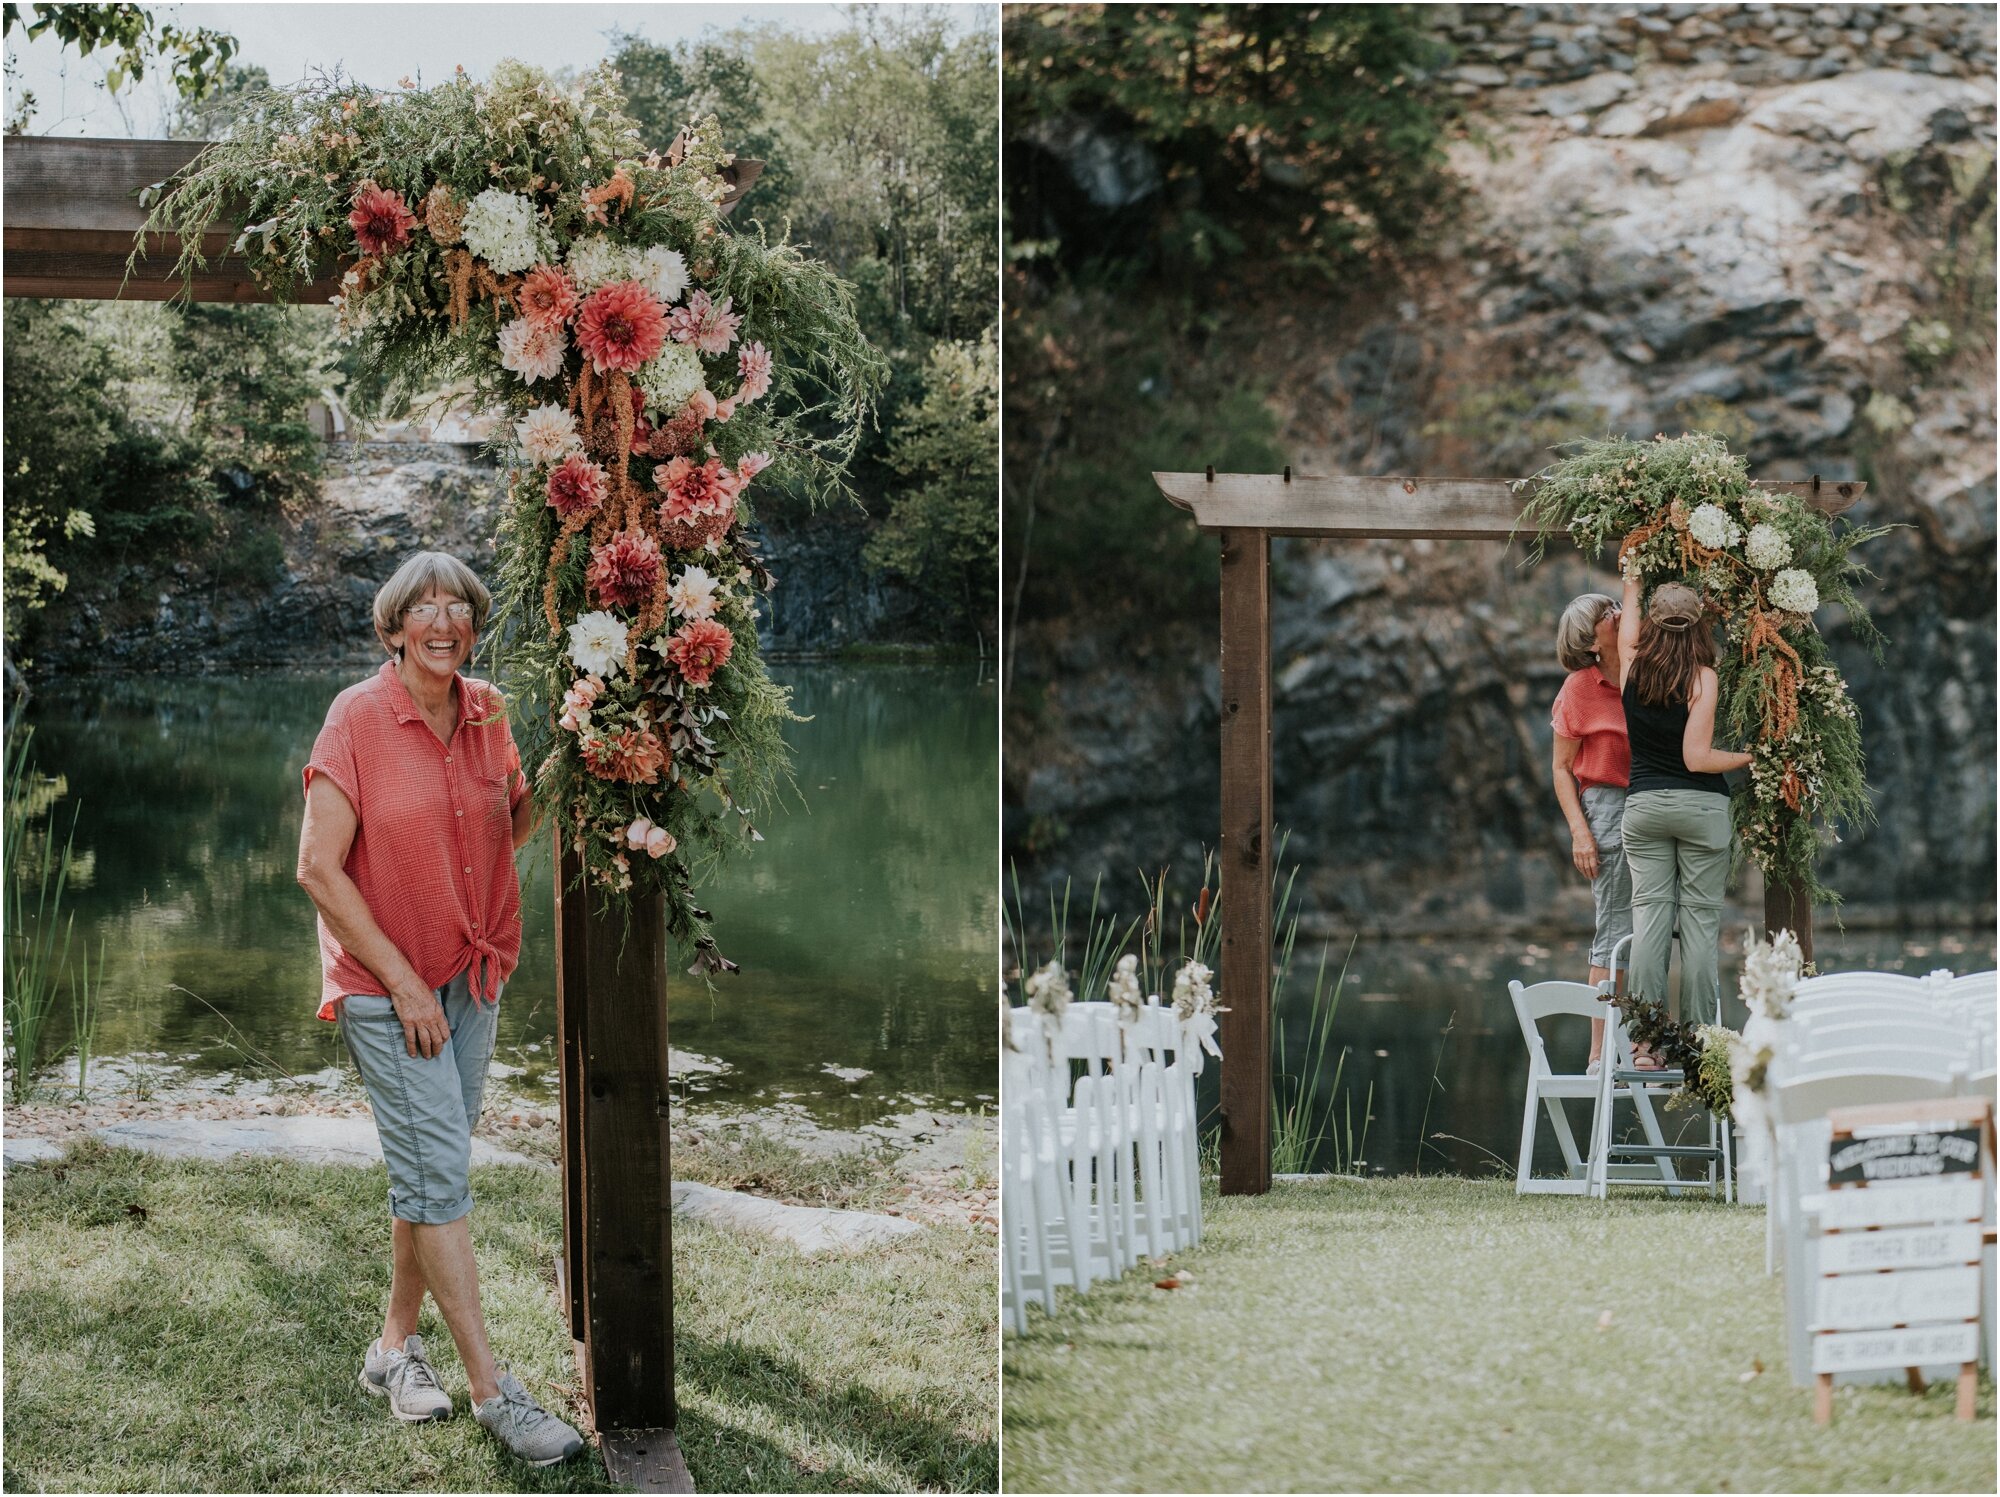   We also finally got to work with Linda Doan from Aunt Willie’s Wildflowers! She is the SWEETEST and creates the most beautiful florals.   Photo: Jeremy Gouge  